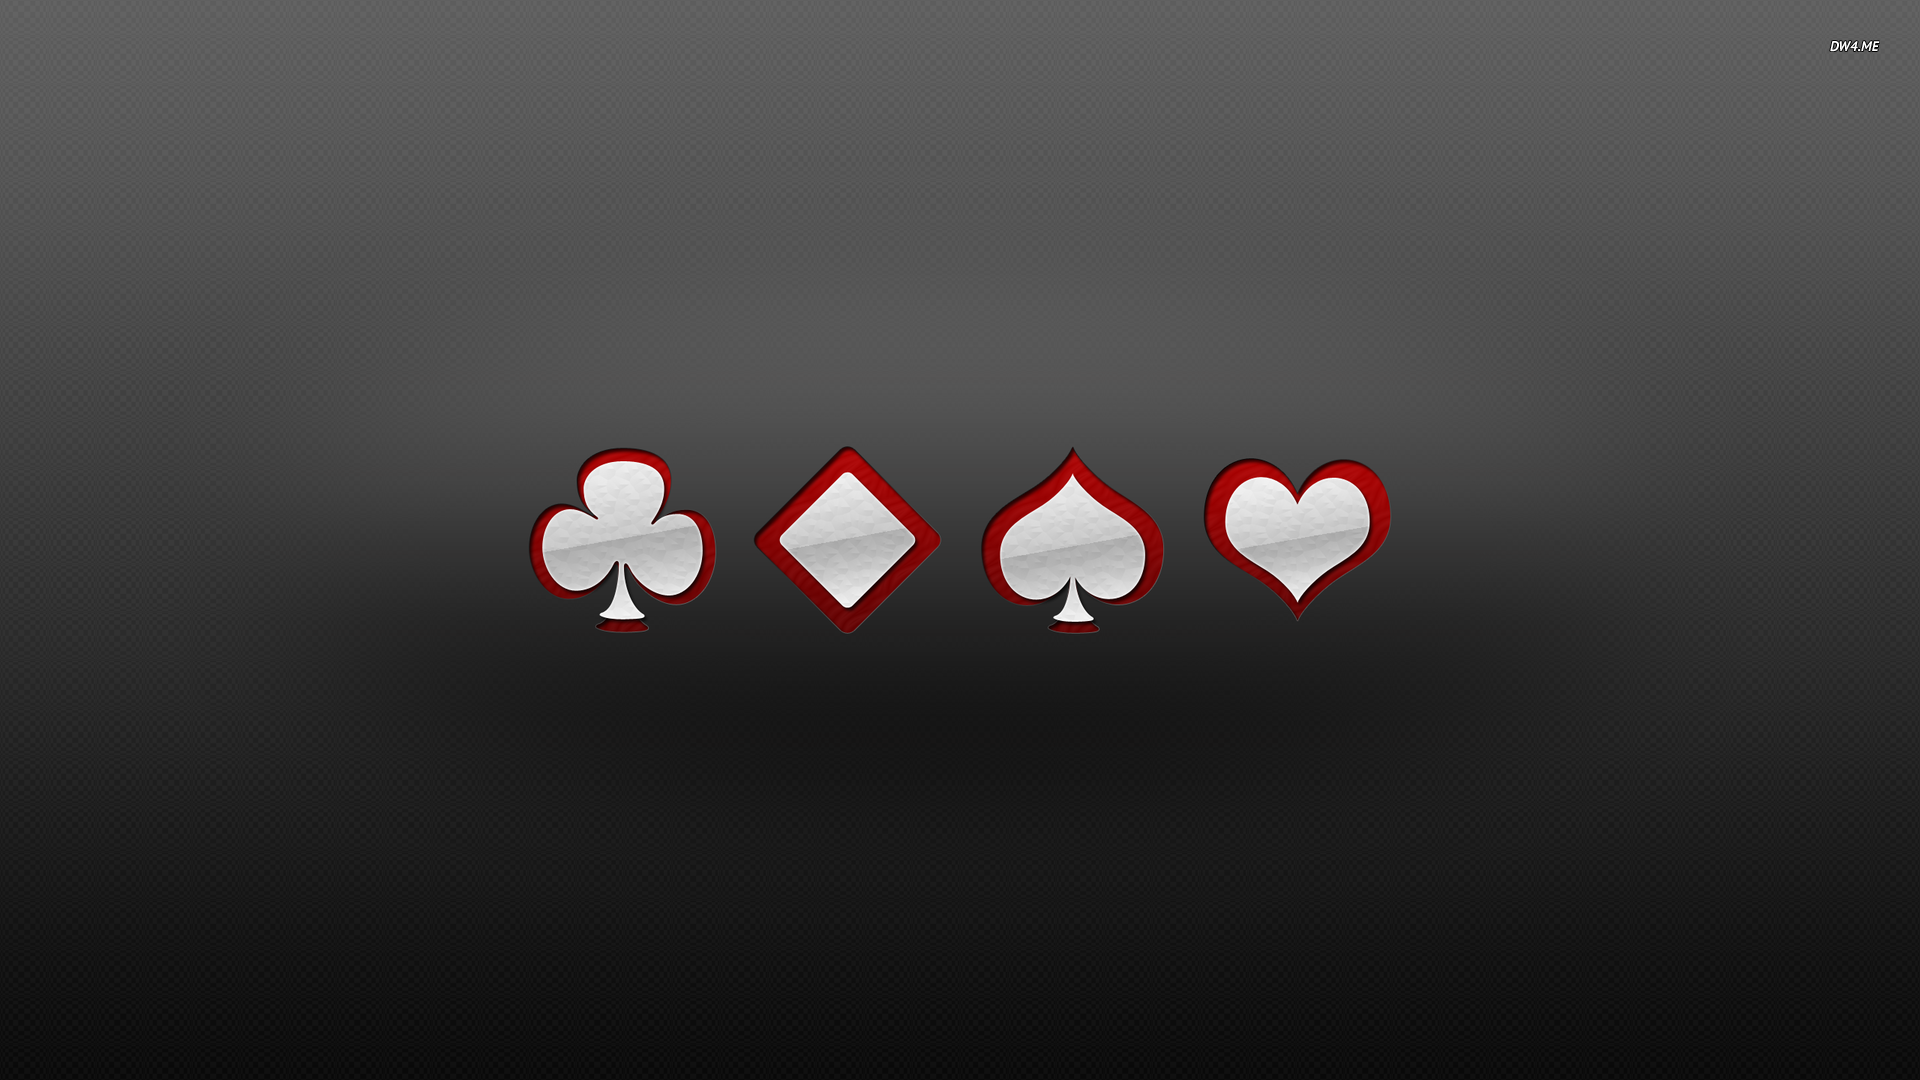 Exclusive Access: The Most Anticipated RentalQQ Poker Games of the Year